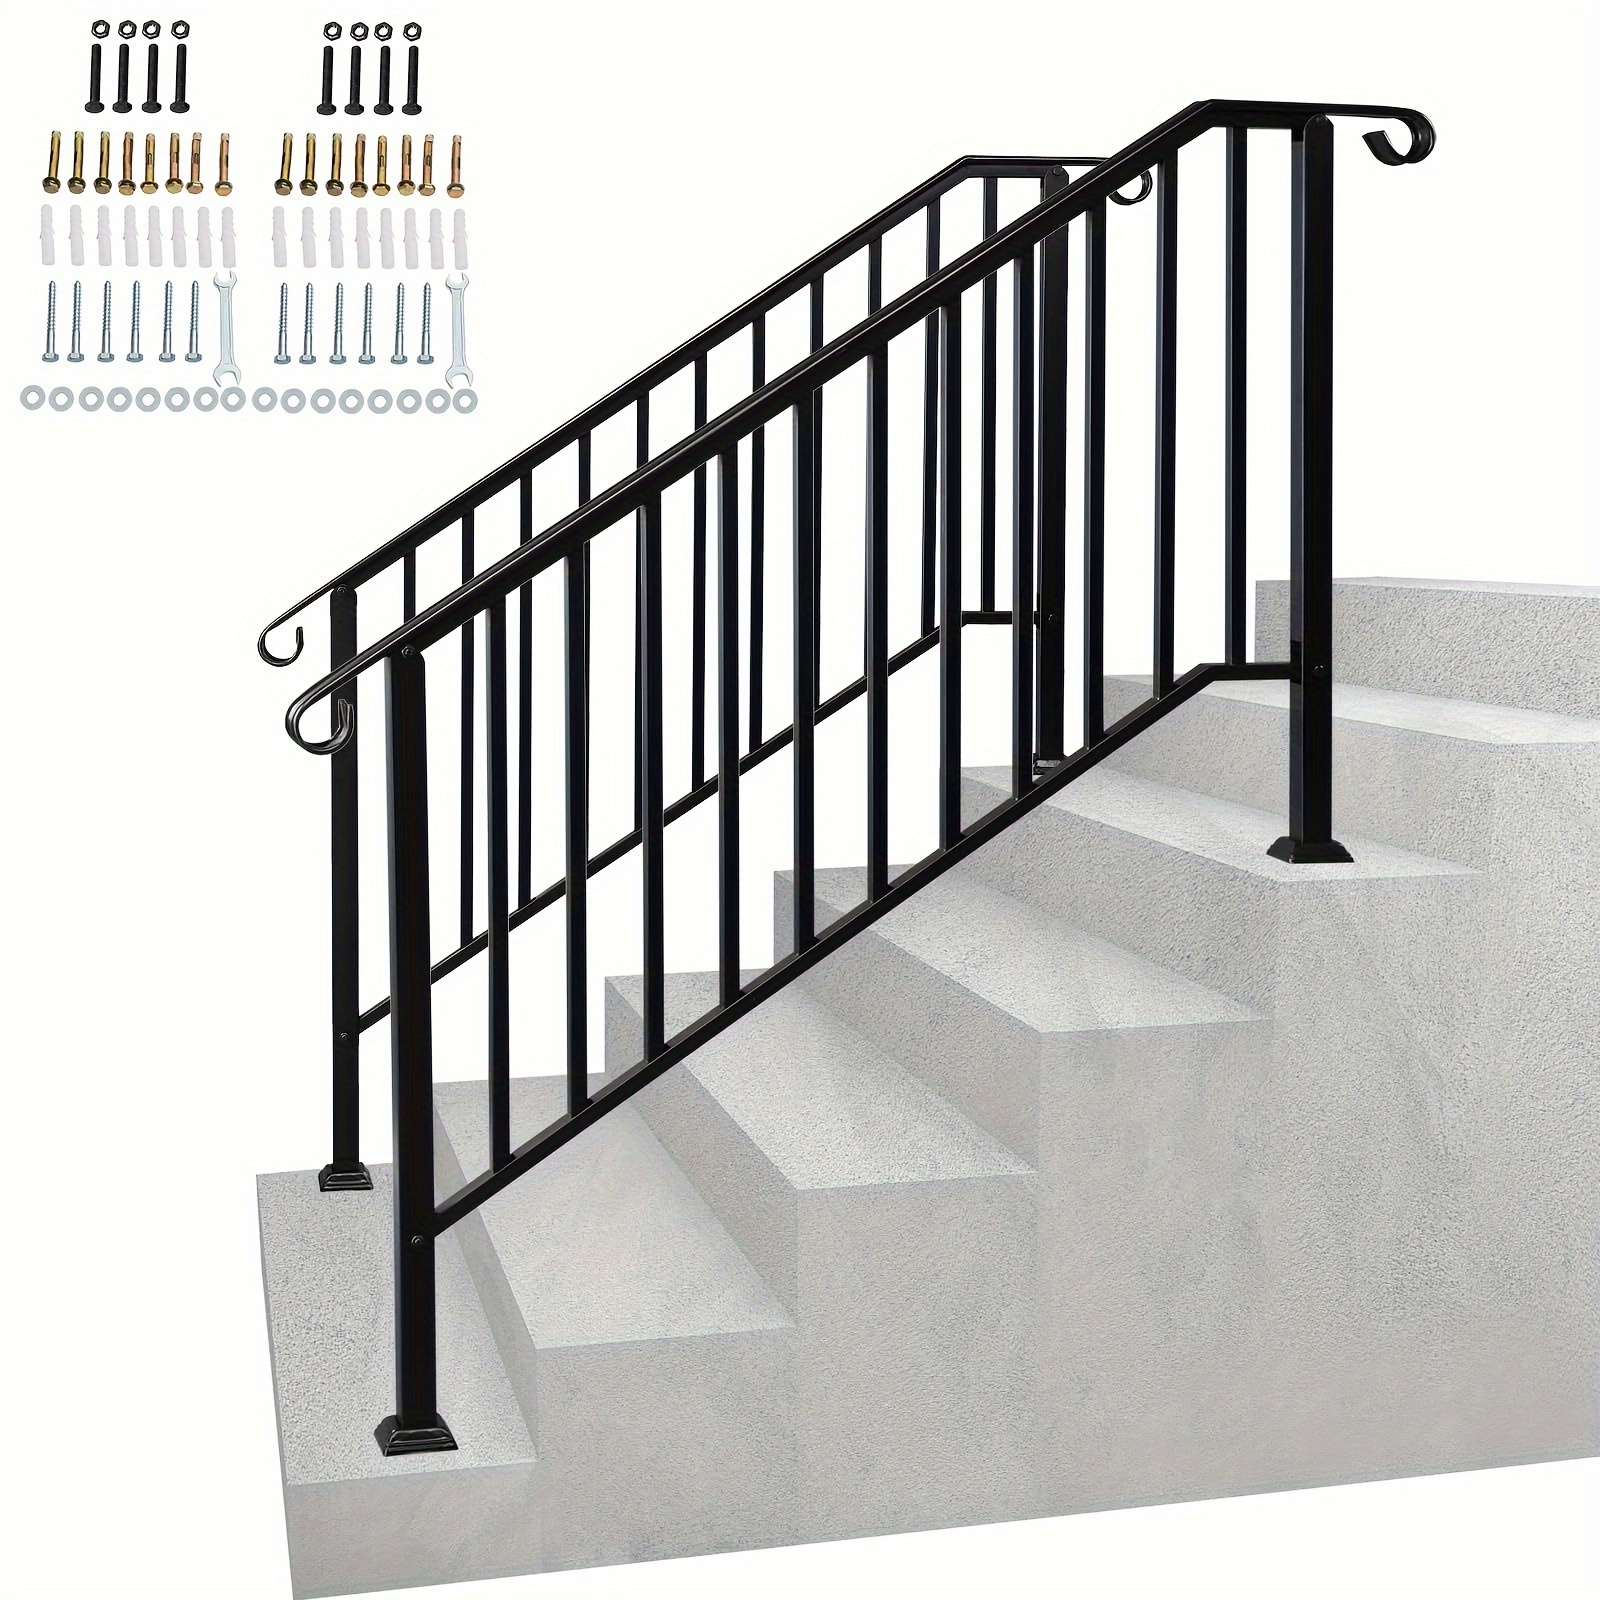 

Antsku Handrails For Outdoor Steps, Wrought Iron Stair Railing, Metal Hand Rail With Installation Kit, Staircase Handrails For Concrete, Porch, Deck, Exterior Steps